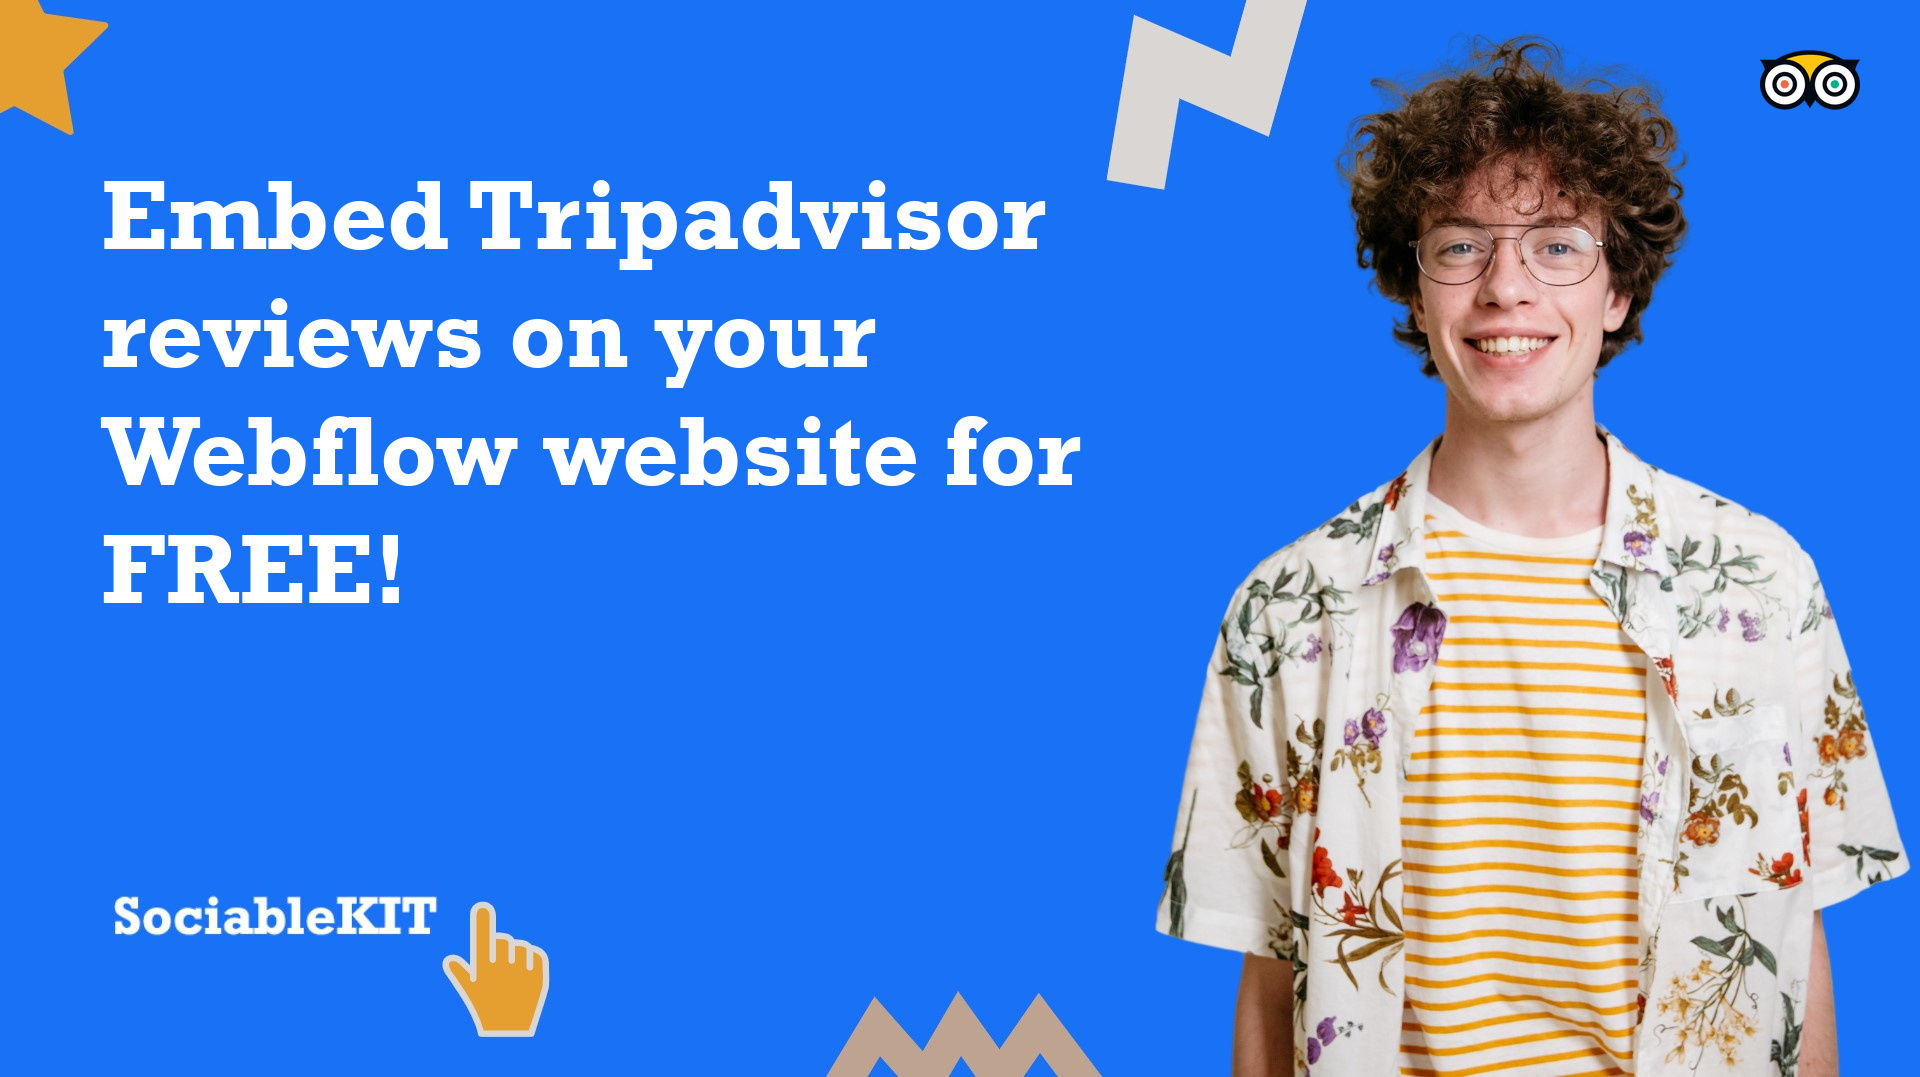 How to embed Tripadvisor reviews on your Webflow website for FREE?